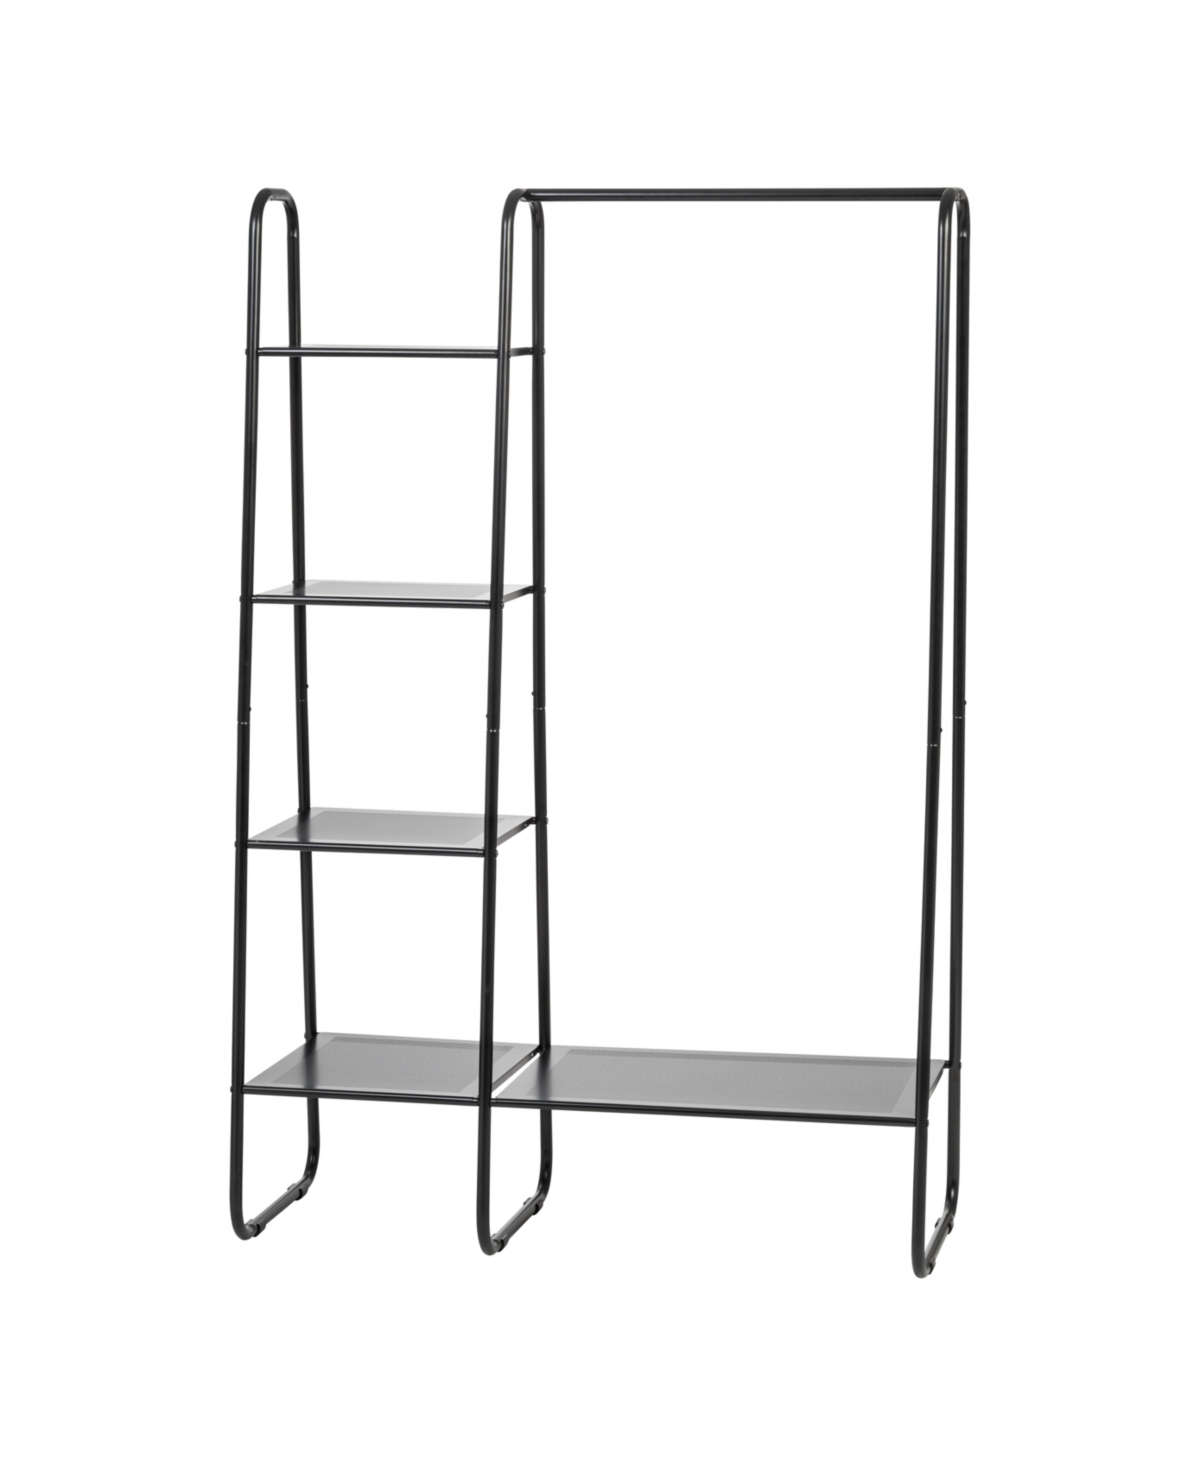 5 Shelf Garment and Accessories Rack for Hanging and Displaying Clothes, Black - Black